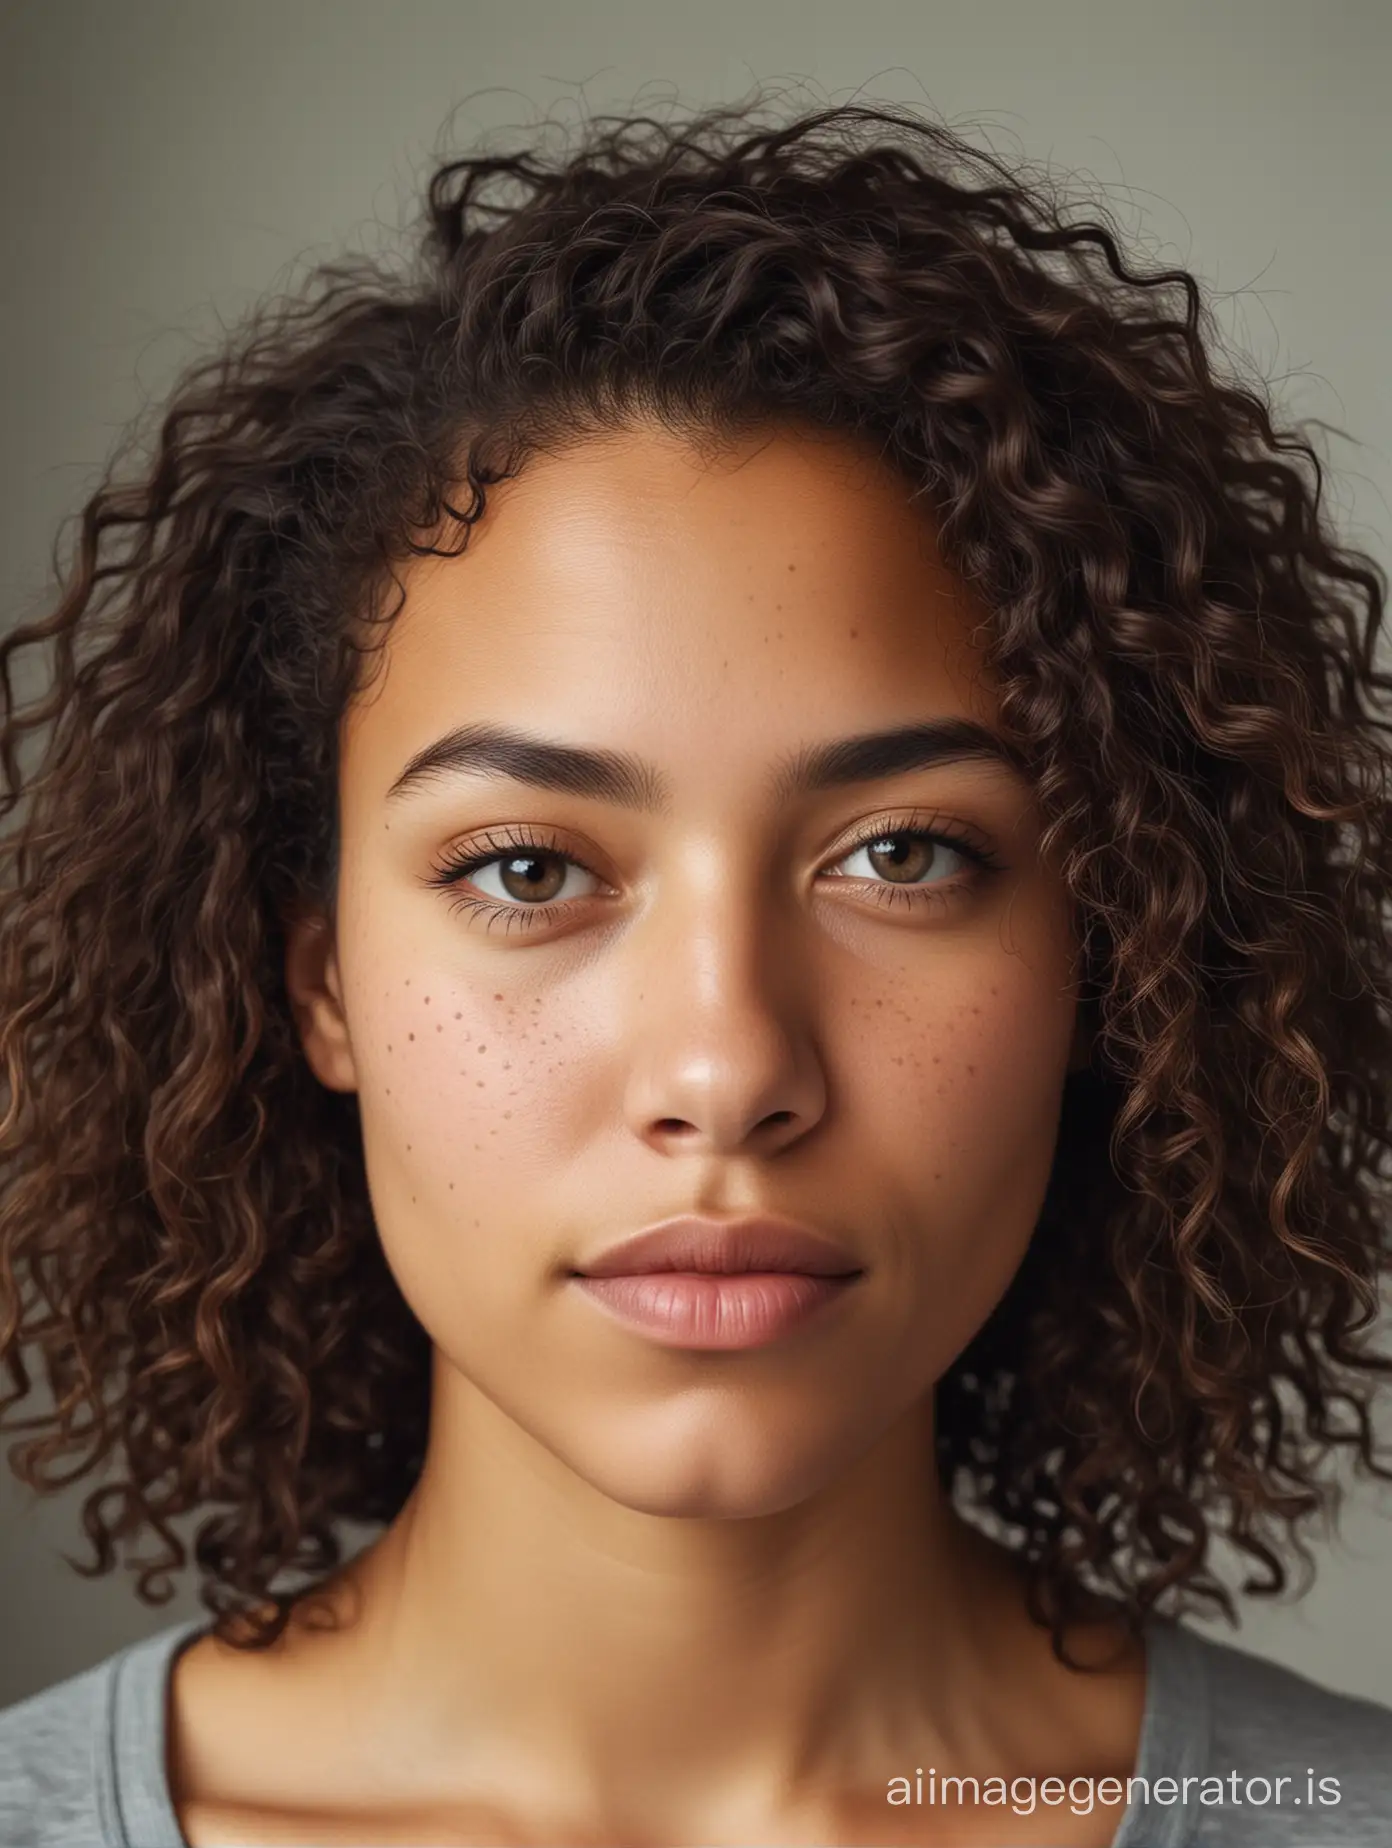 I want a photo of an identity of a mixed-race woman who doesn't look straight and serene